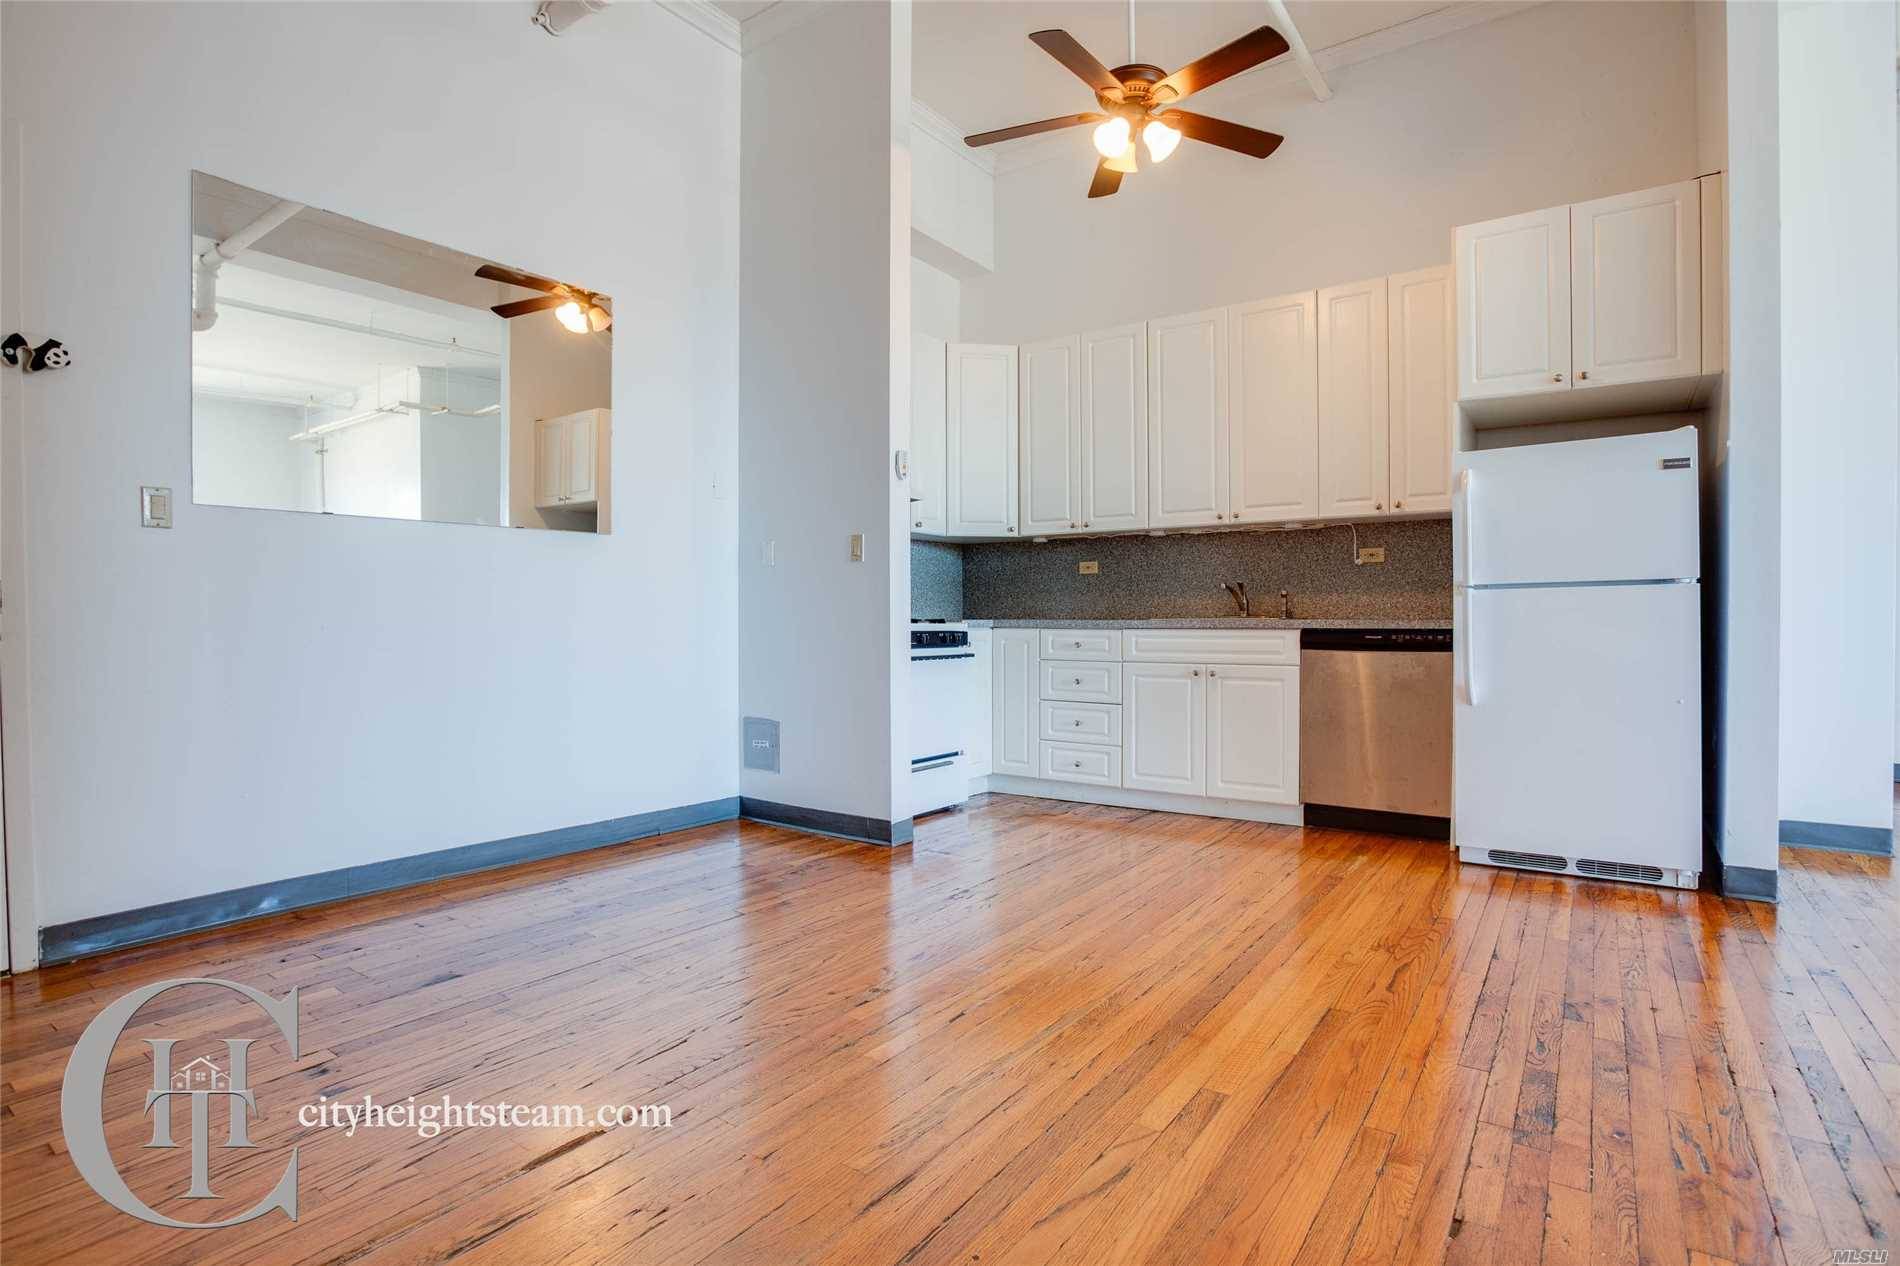 Wyckoff Avenue, A Historic Knitting Mill In Bushwick, Now Converted To Spacious Loft Rentals!